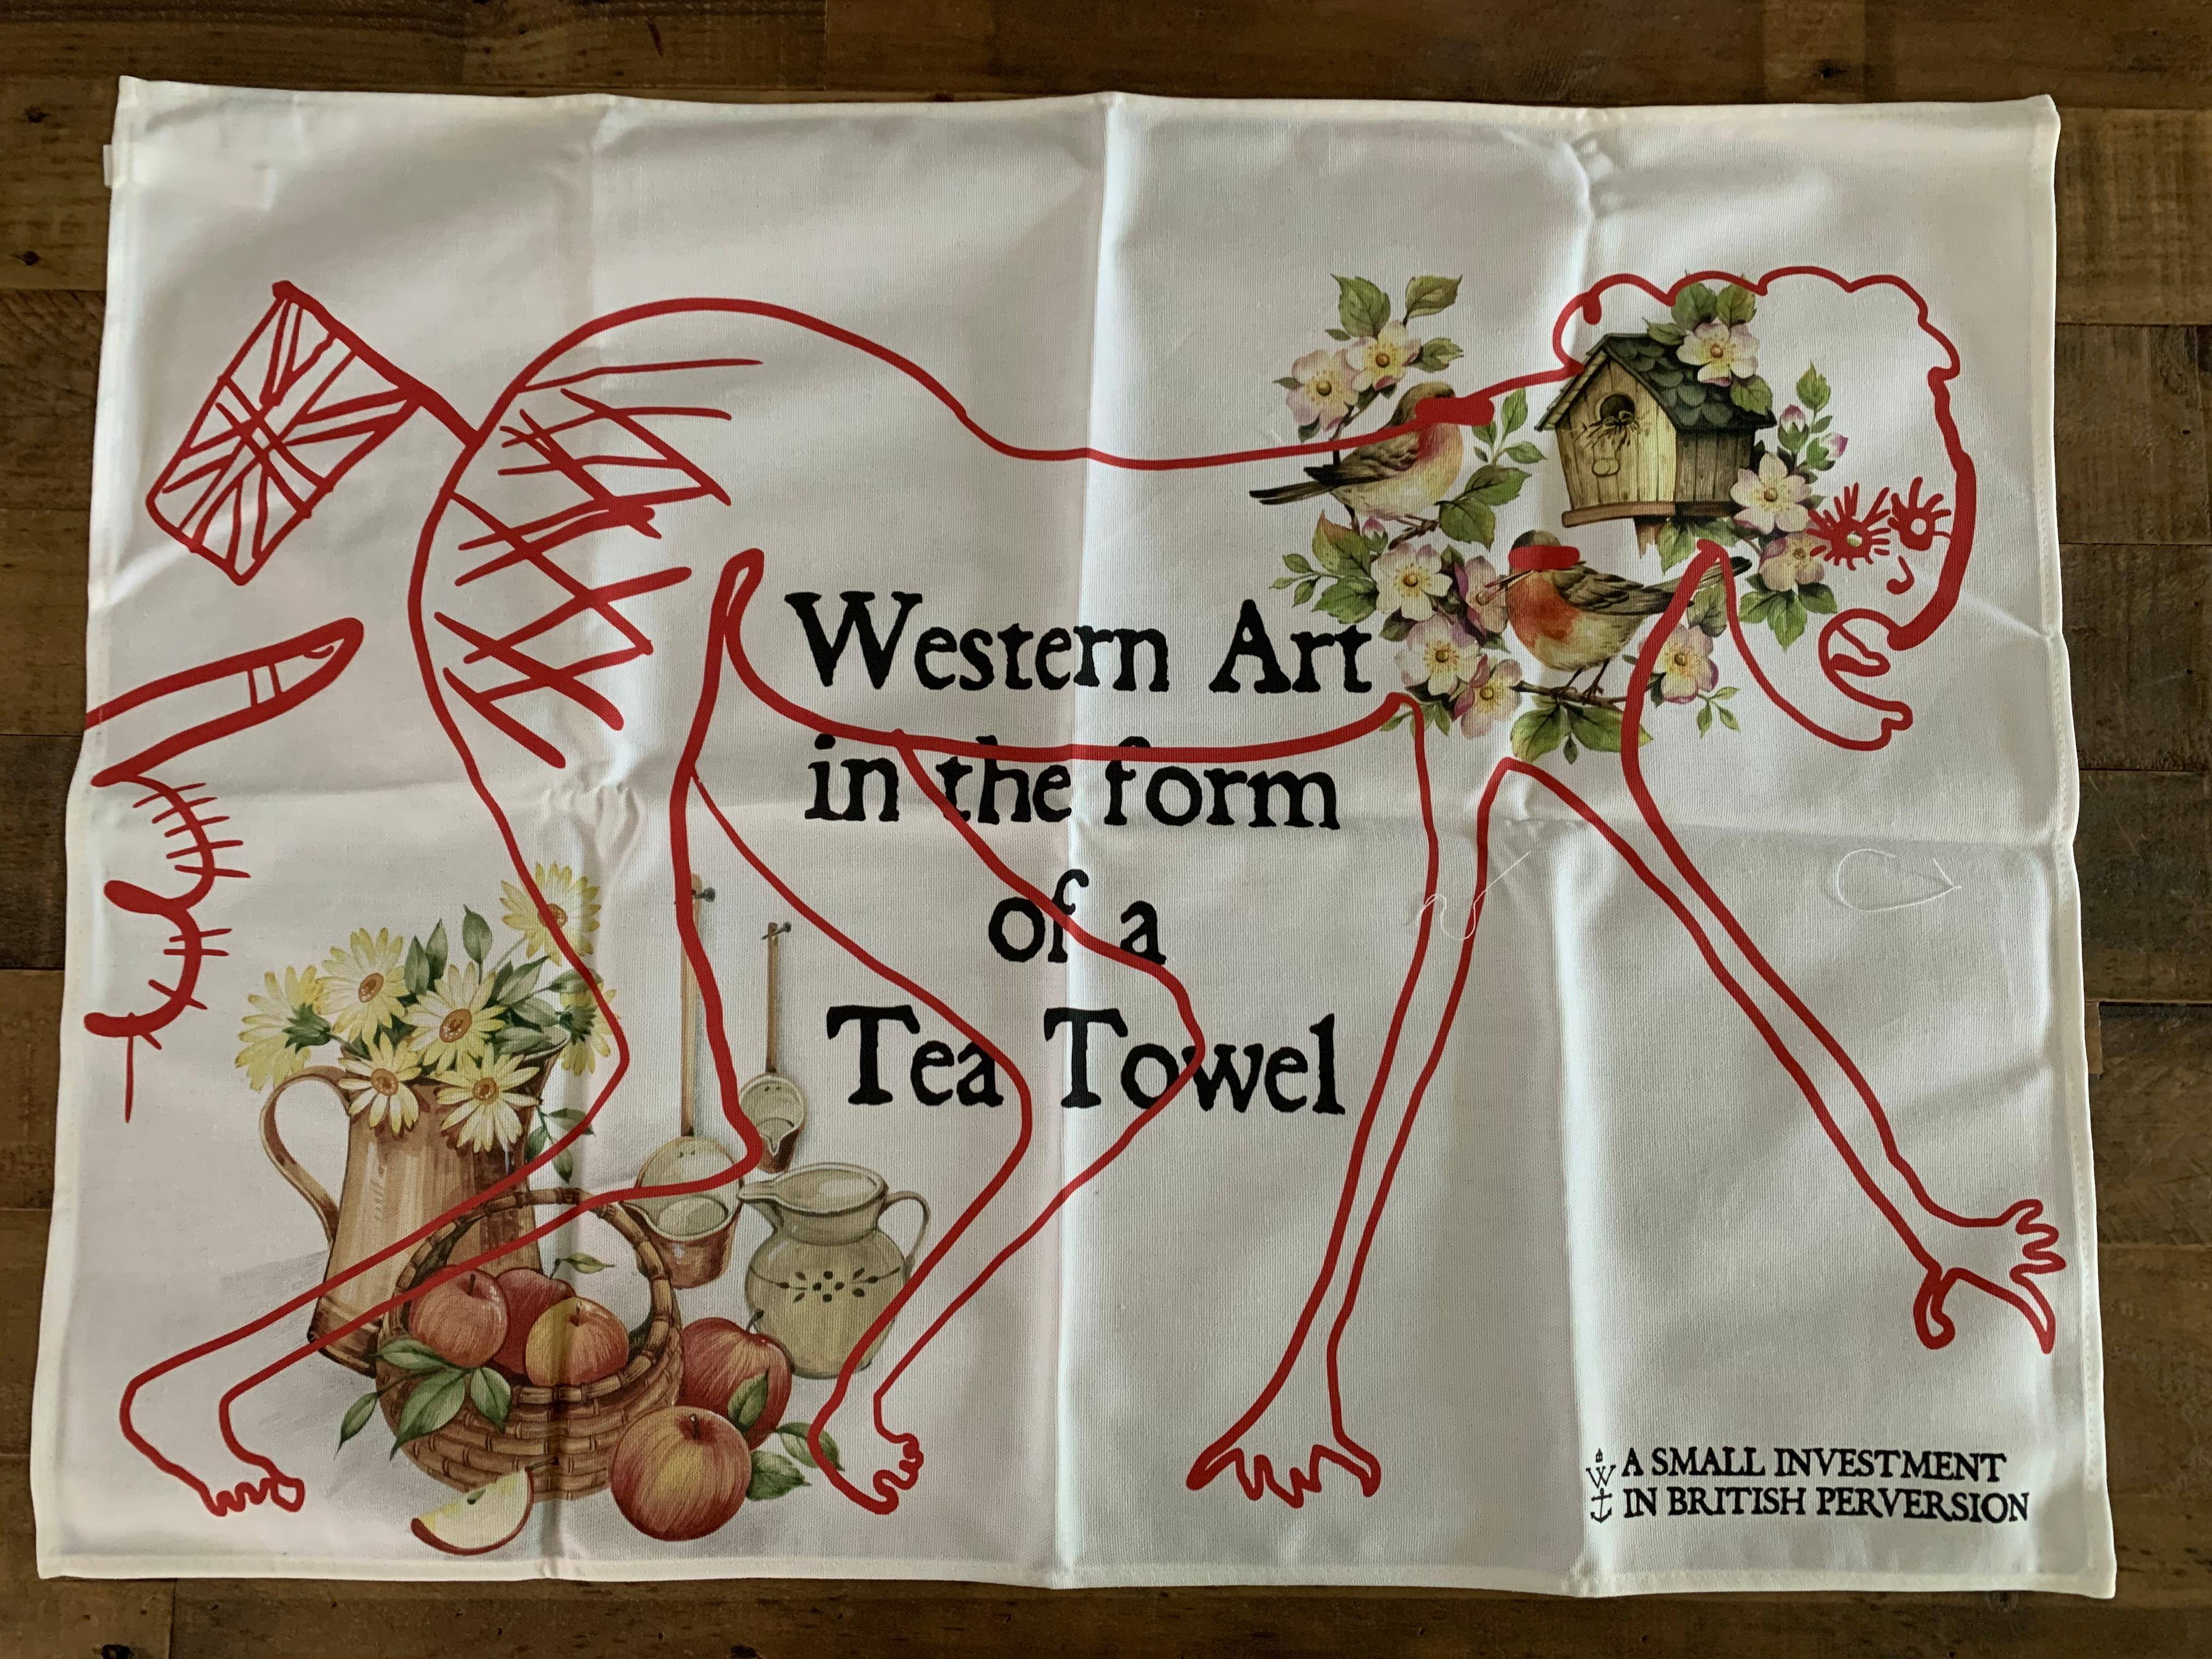 Western Art in the Form of a Tea Towel Grayson perry